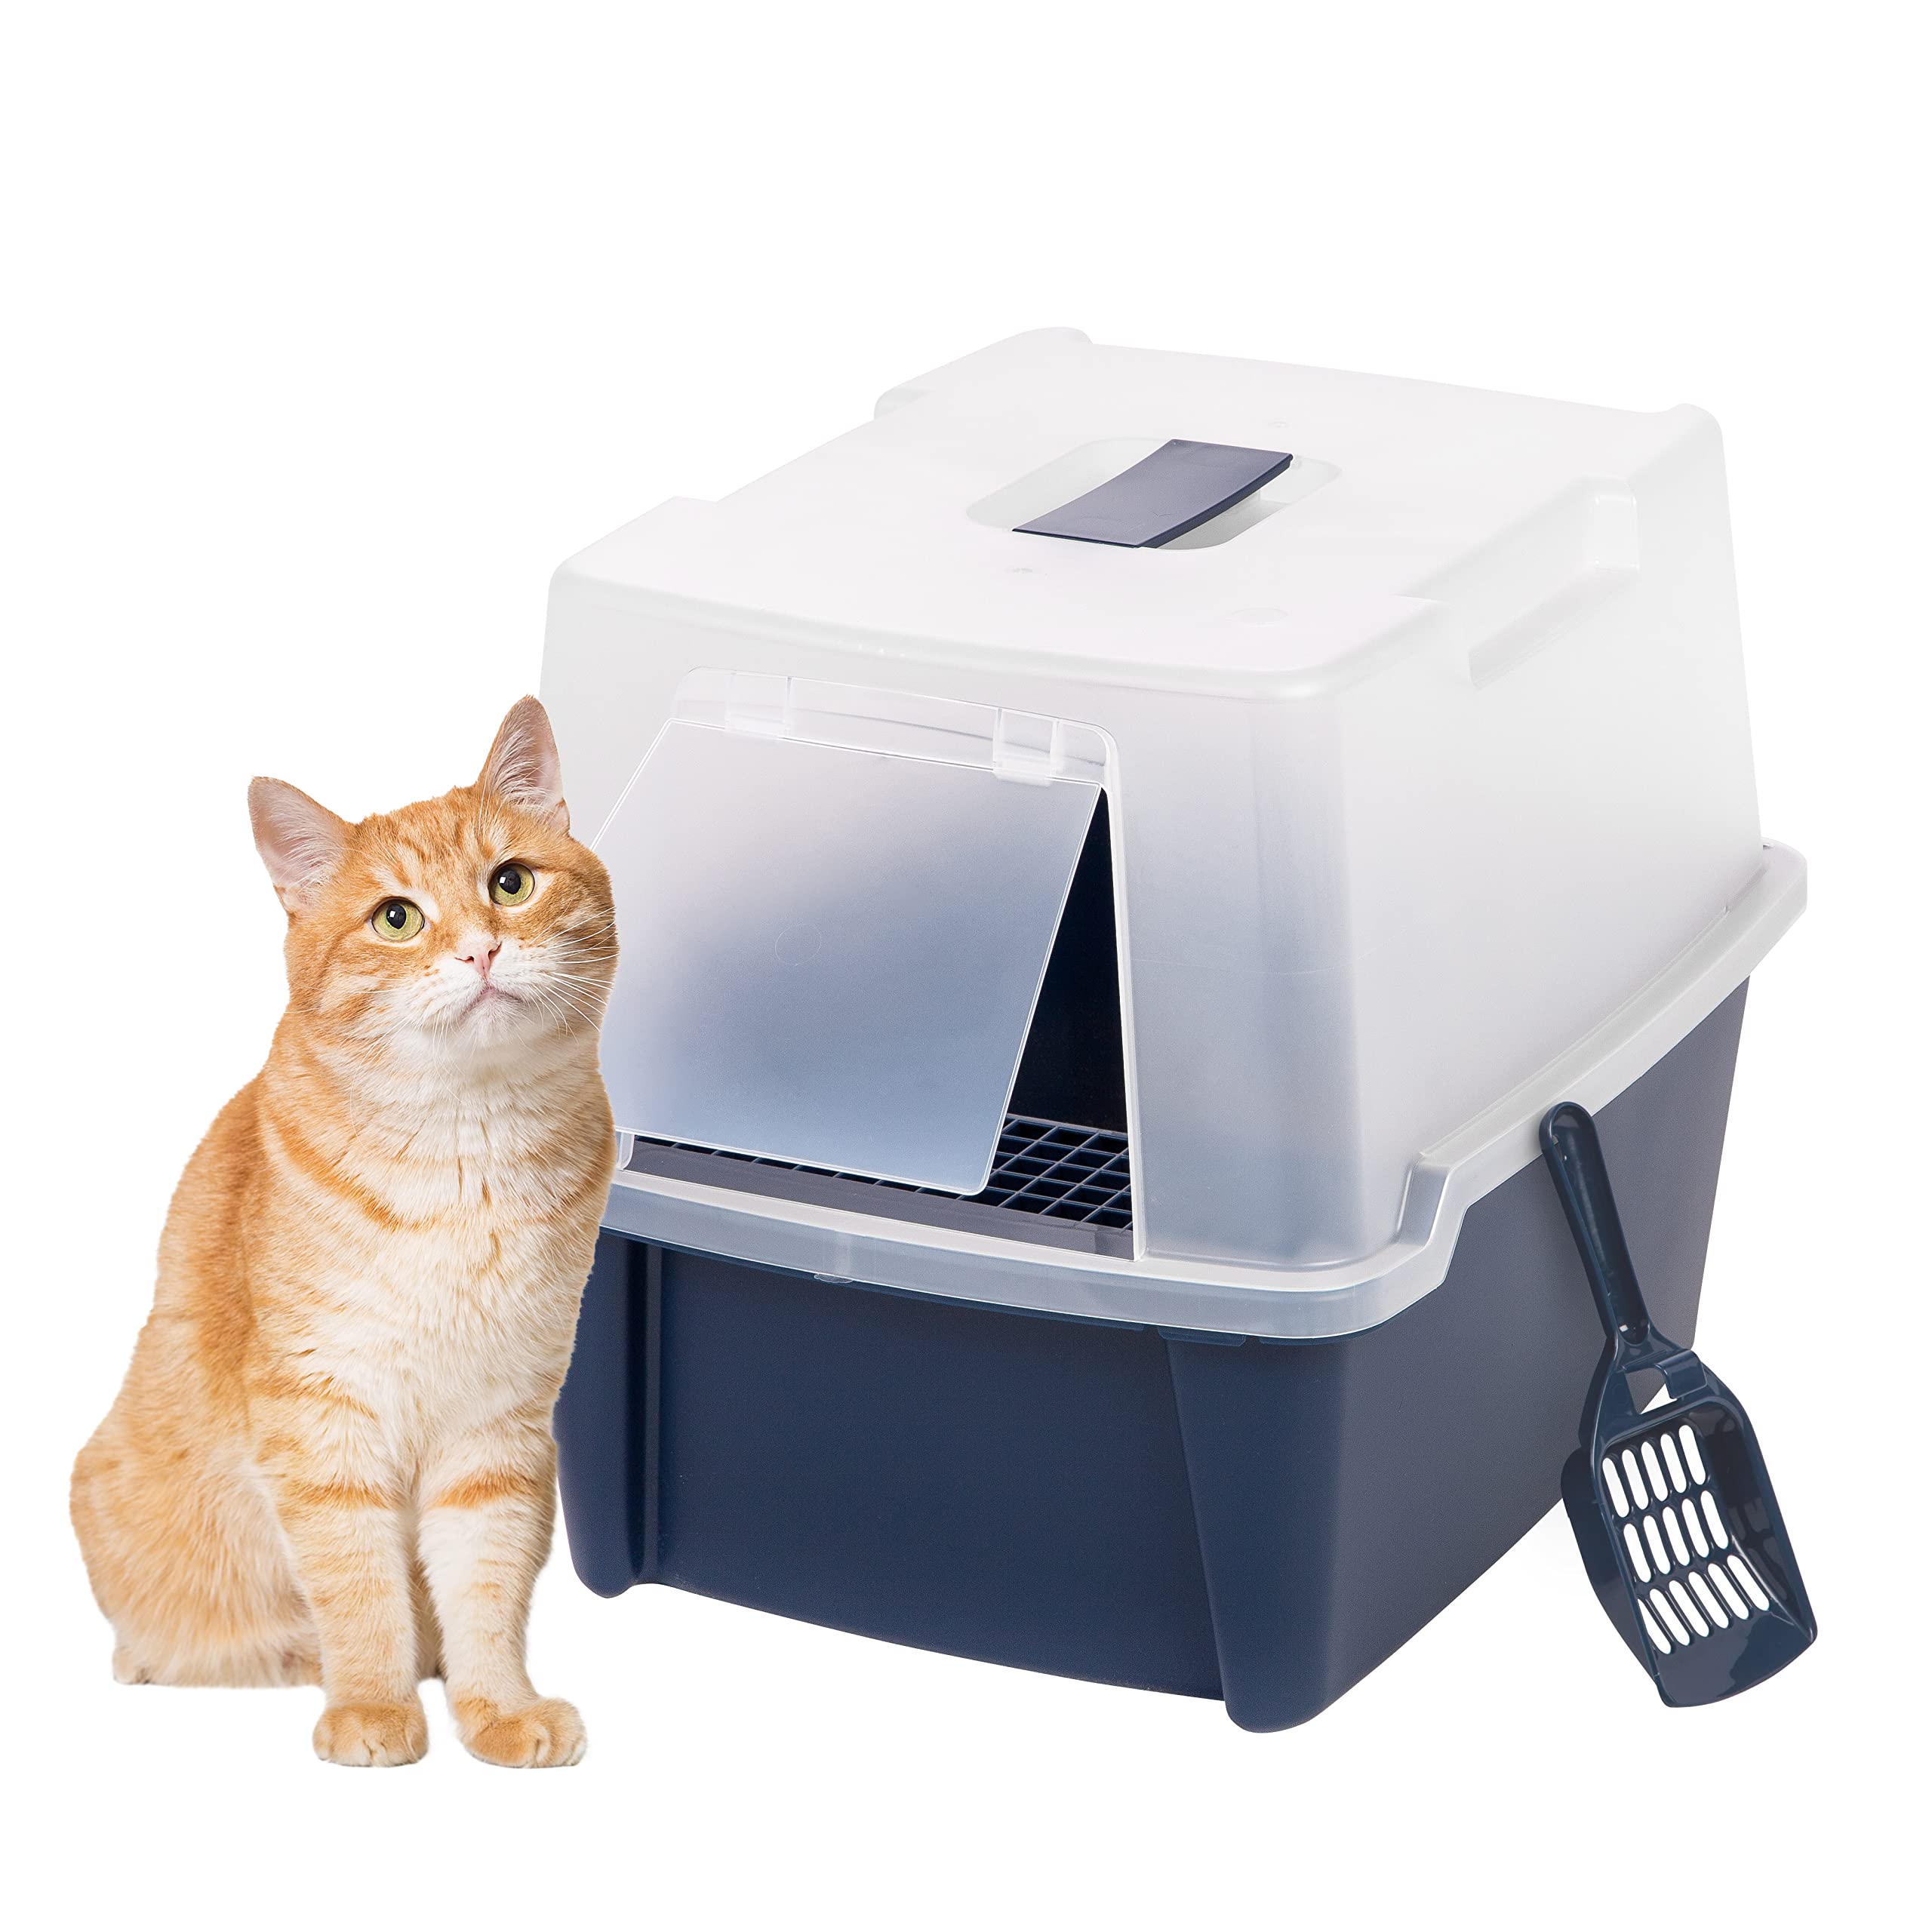 Book Cover IRIS USA Large Hooded Cat Litter Box with Front Door Flap and Scoop, Enclosed Kitty Litter Tray with Entry Gate for Privacy and Keeping Litter Inside, Navy